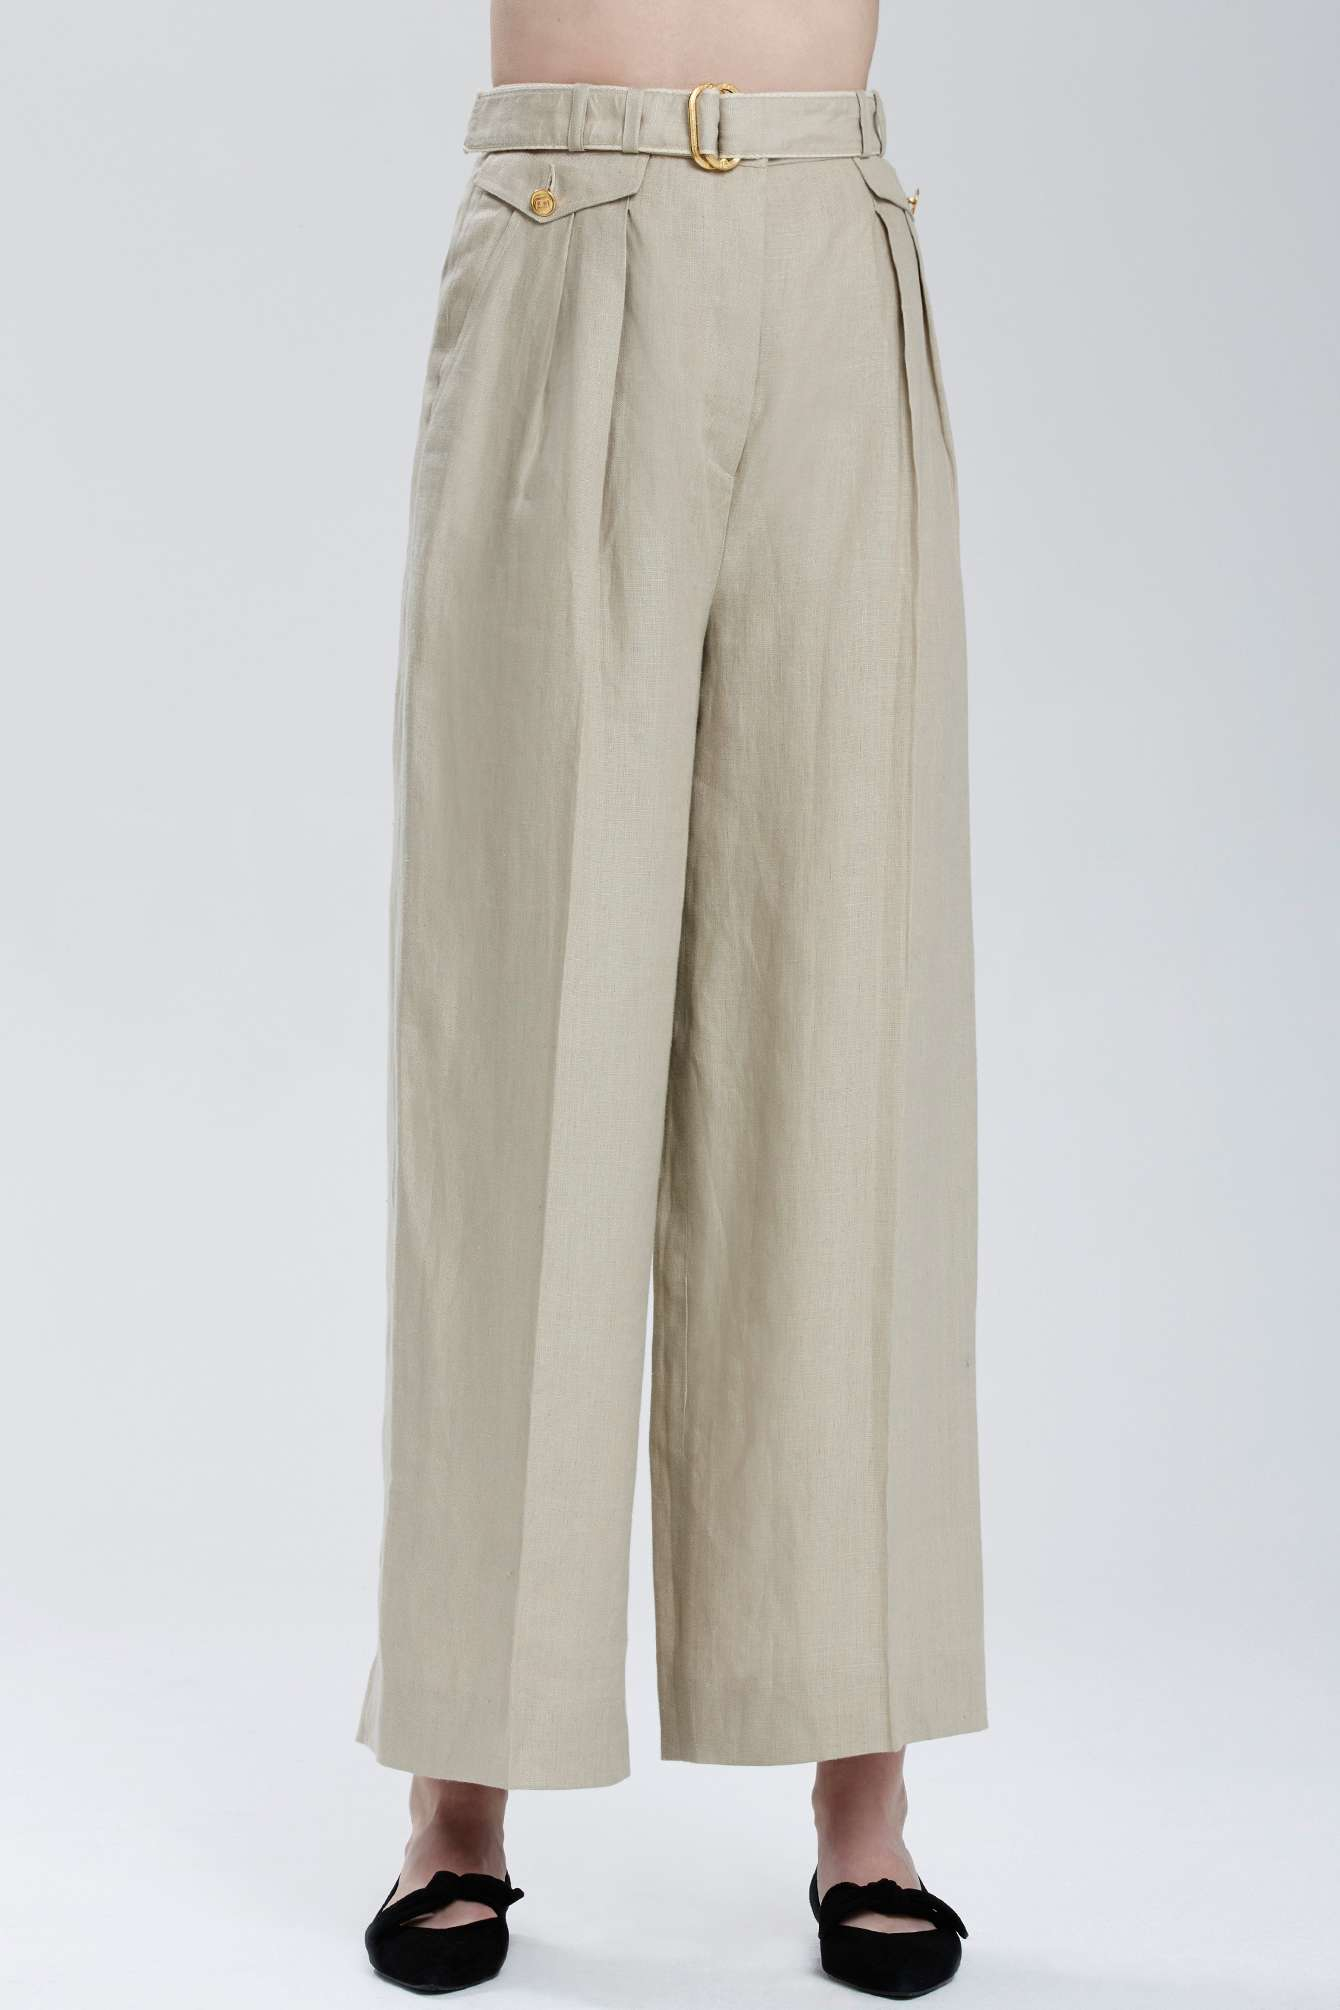 Nasty gal Vintage Chanel Lanester Wide-Leg Trousers in Khaki | Lyst